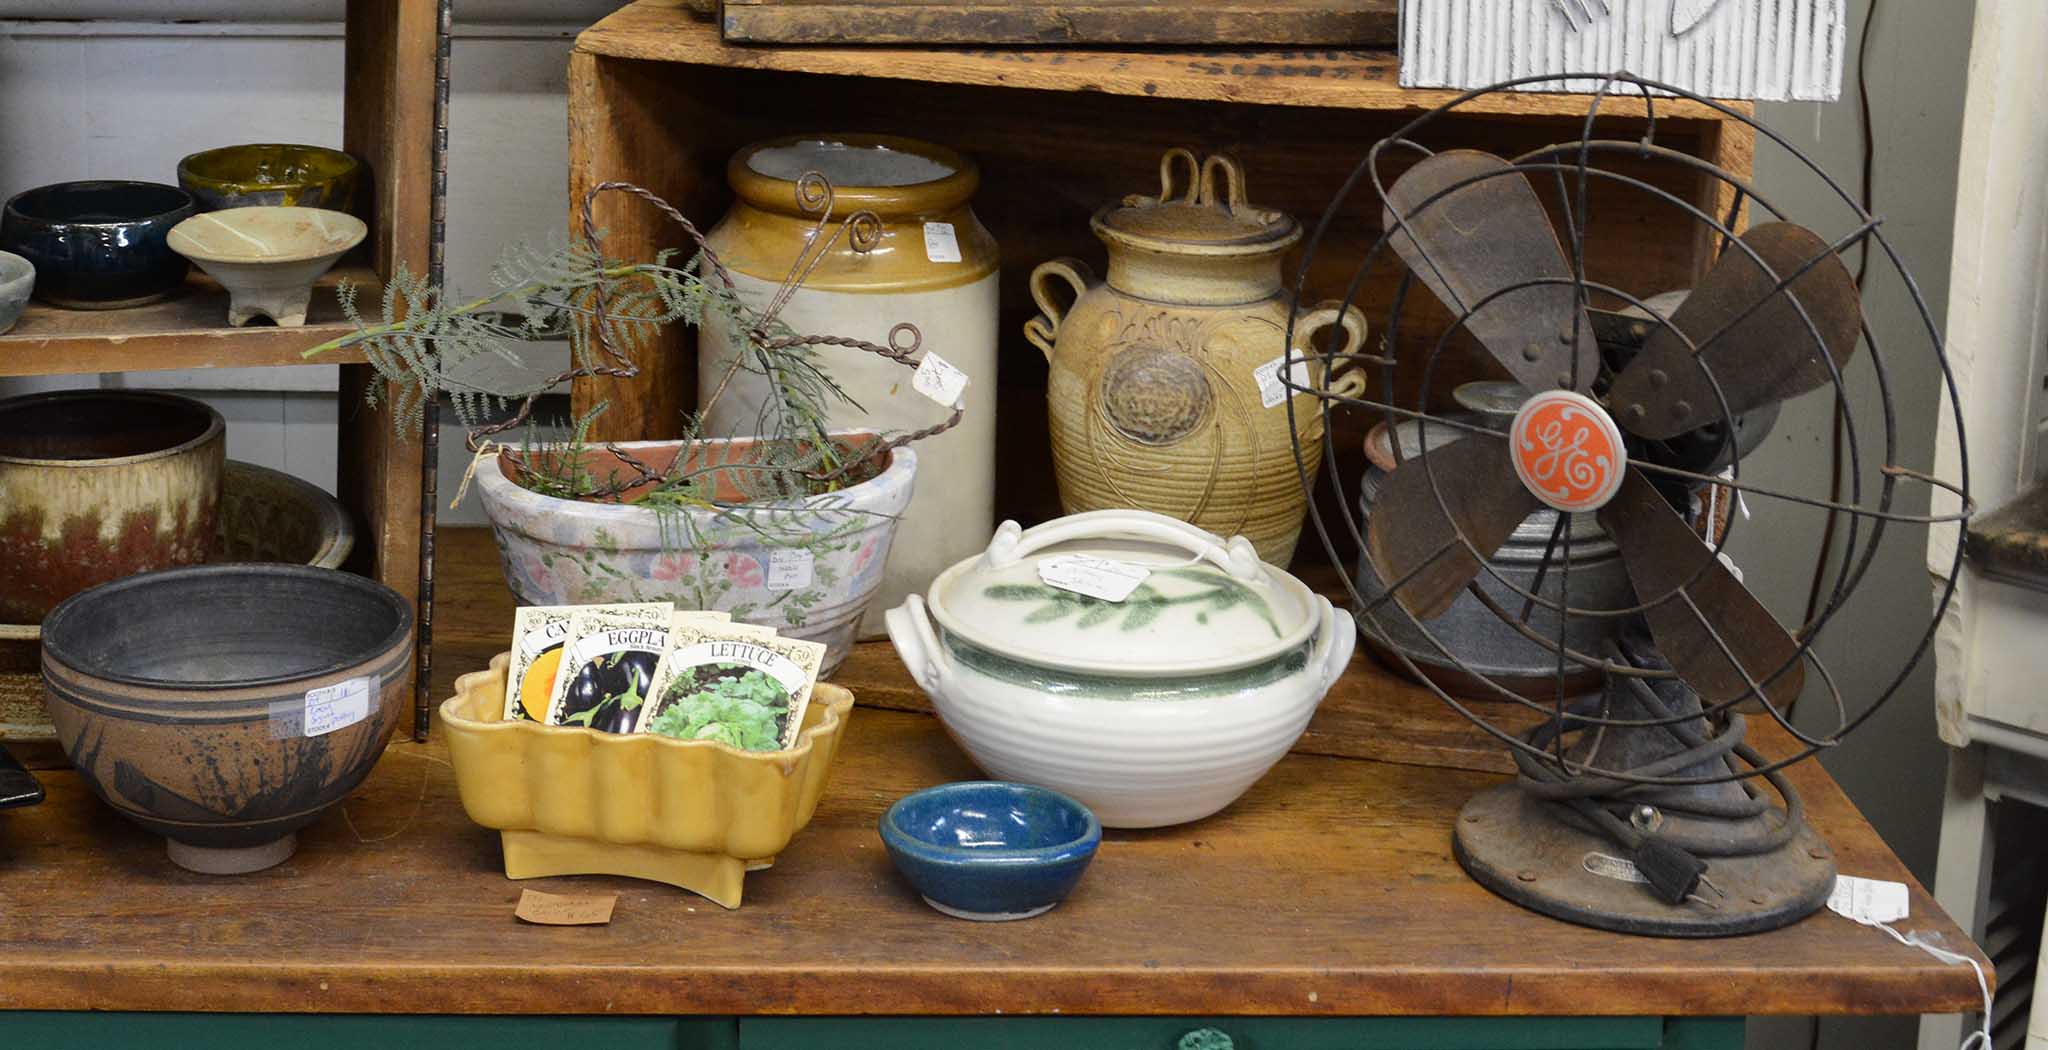 Antique items to add a cottage or Southern stye typical from Fairhope, Alabama